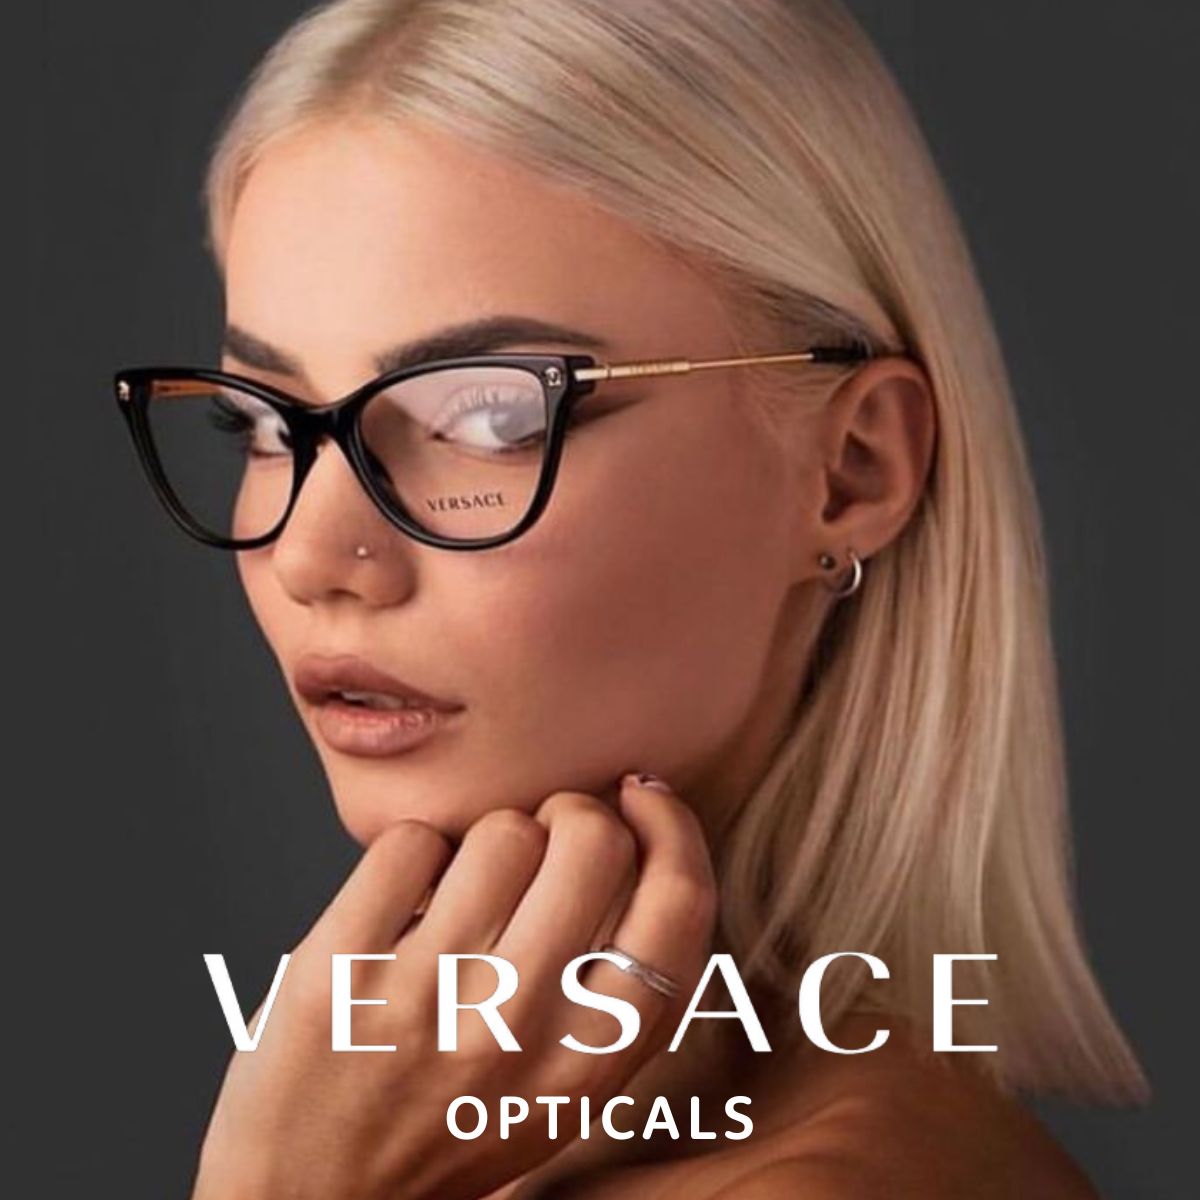 "Discover luxurious Versace optical glasses for men and women at Optorium. Choose from stylish frames with high-quality lenses."